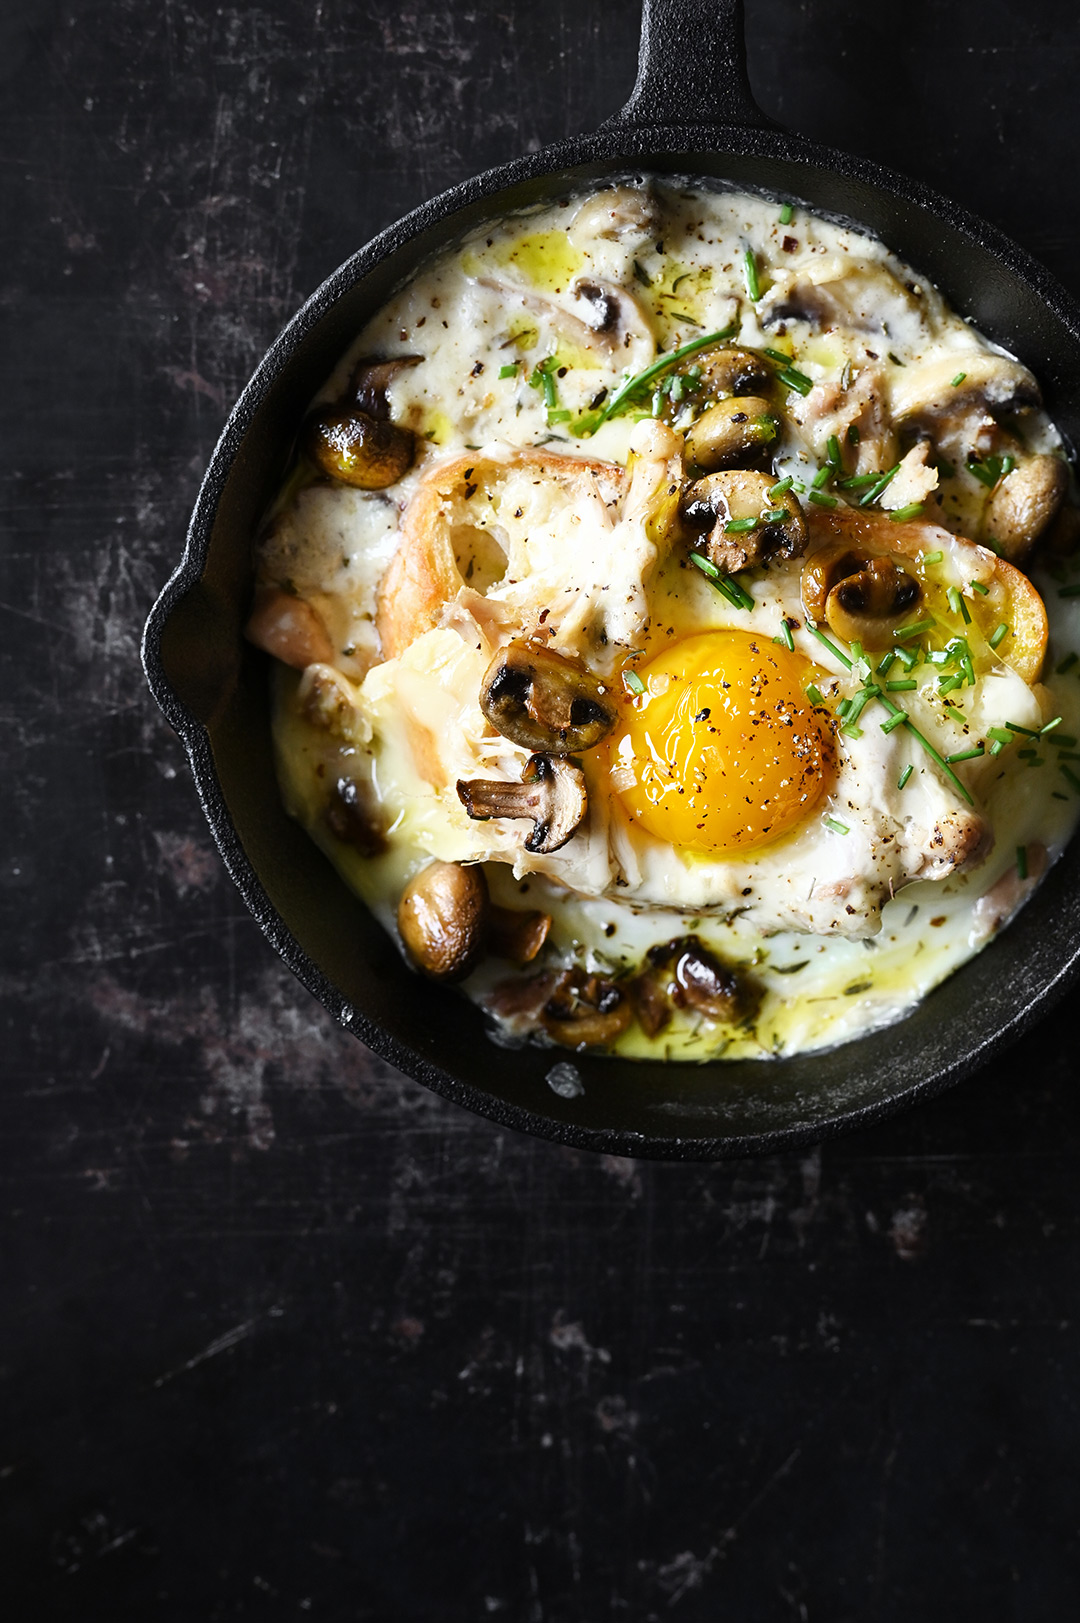 serving dumplings | Creamy mushrooms with egg and shredded chicken on toast